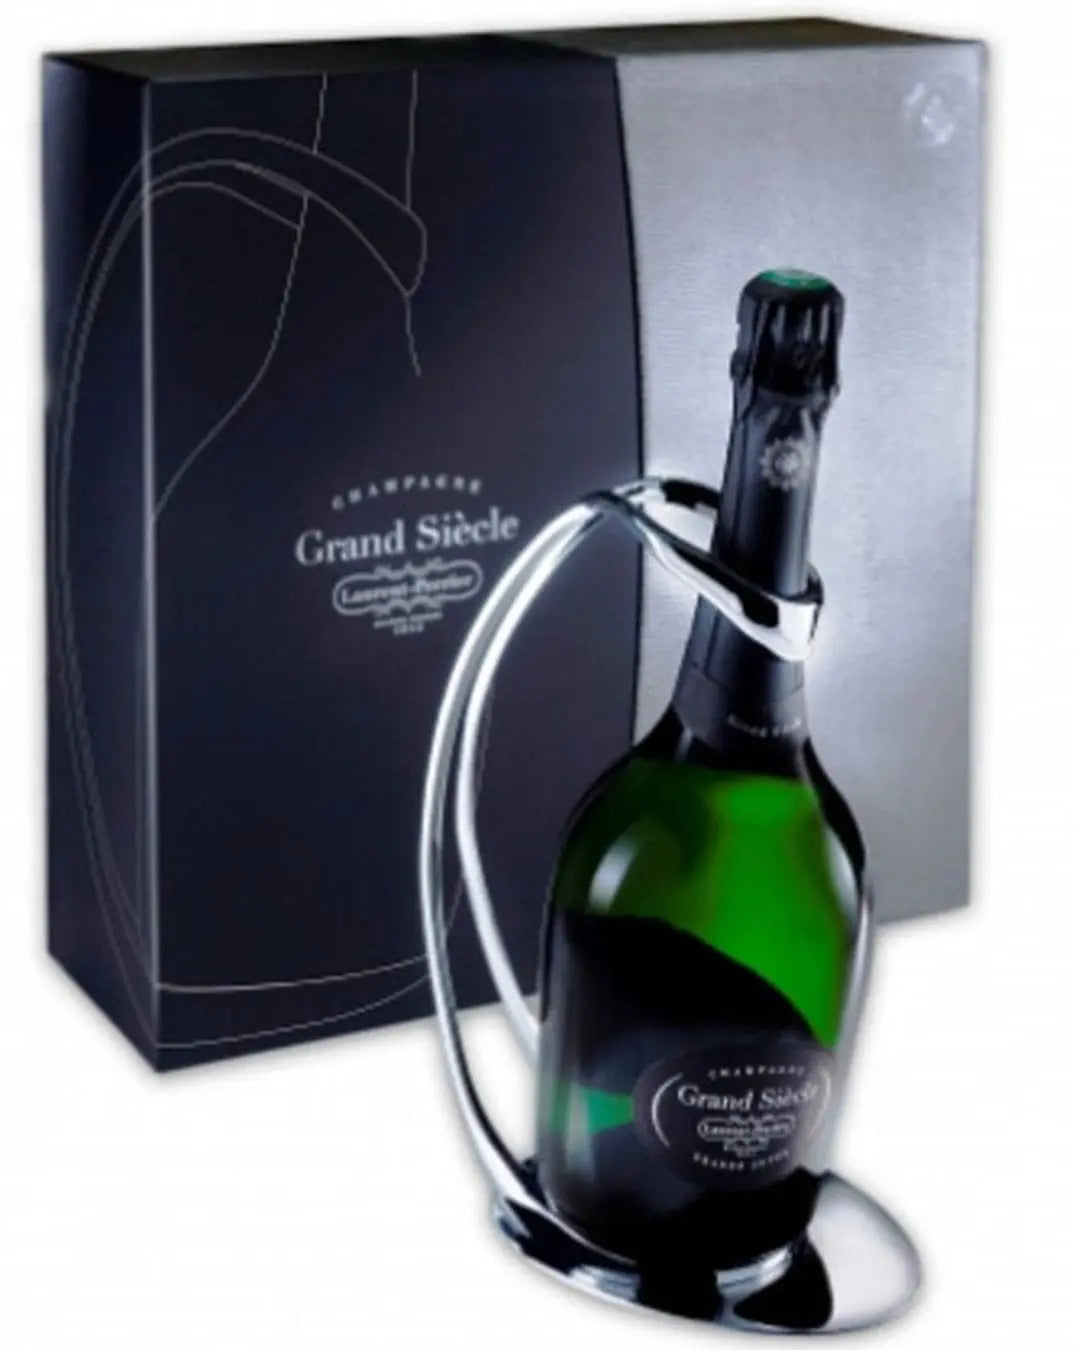 Laurent Perrier Grand Siècle Brut with Cradle, 75 cl Champagne & Sparkling